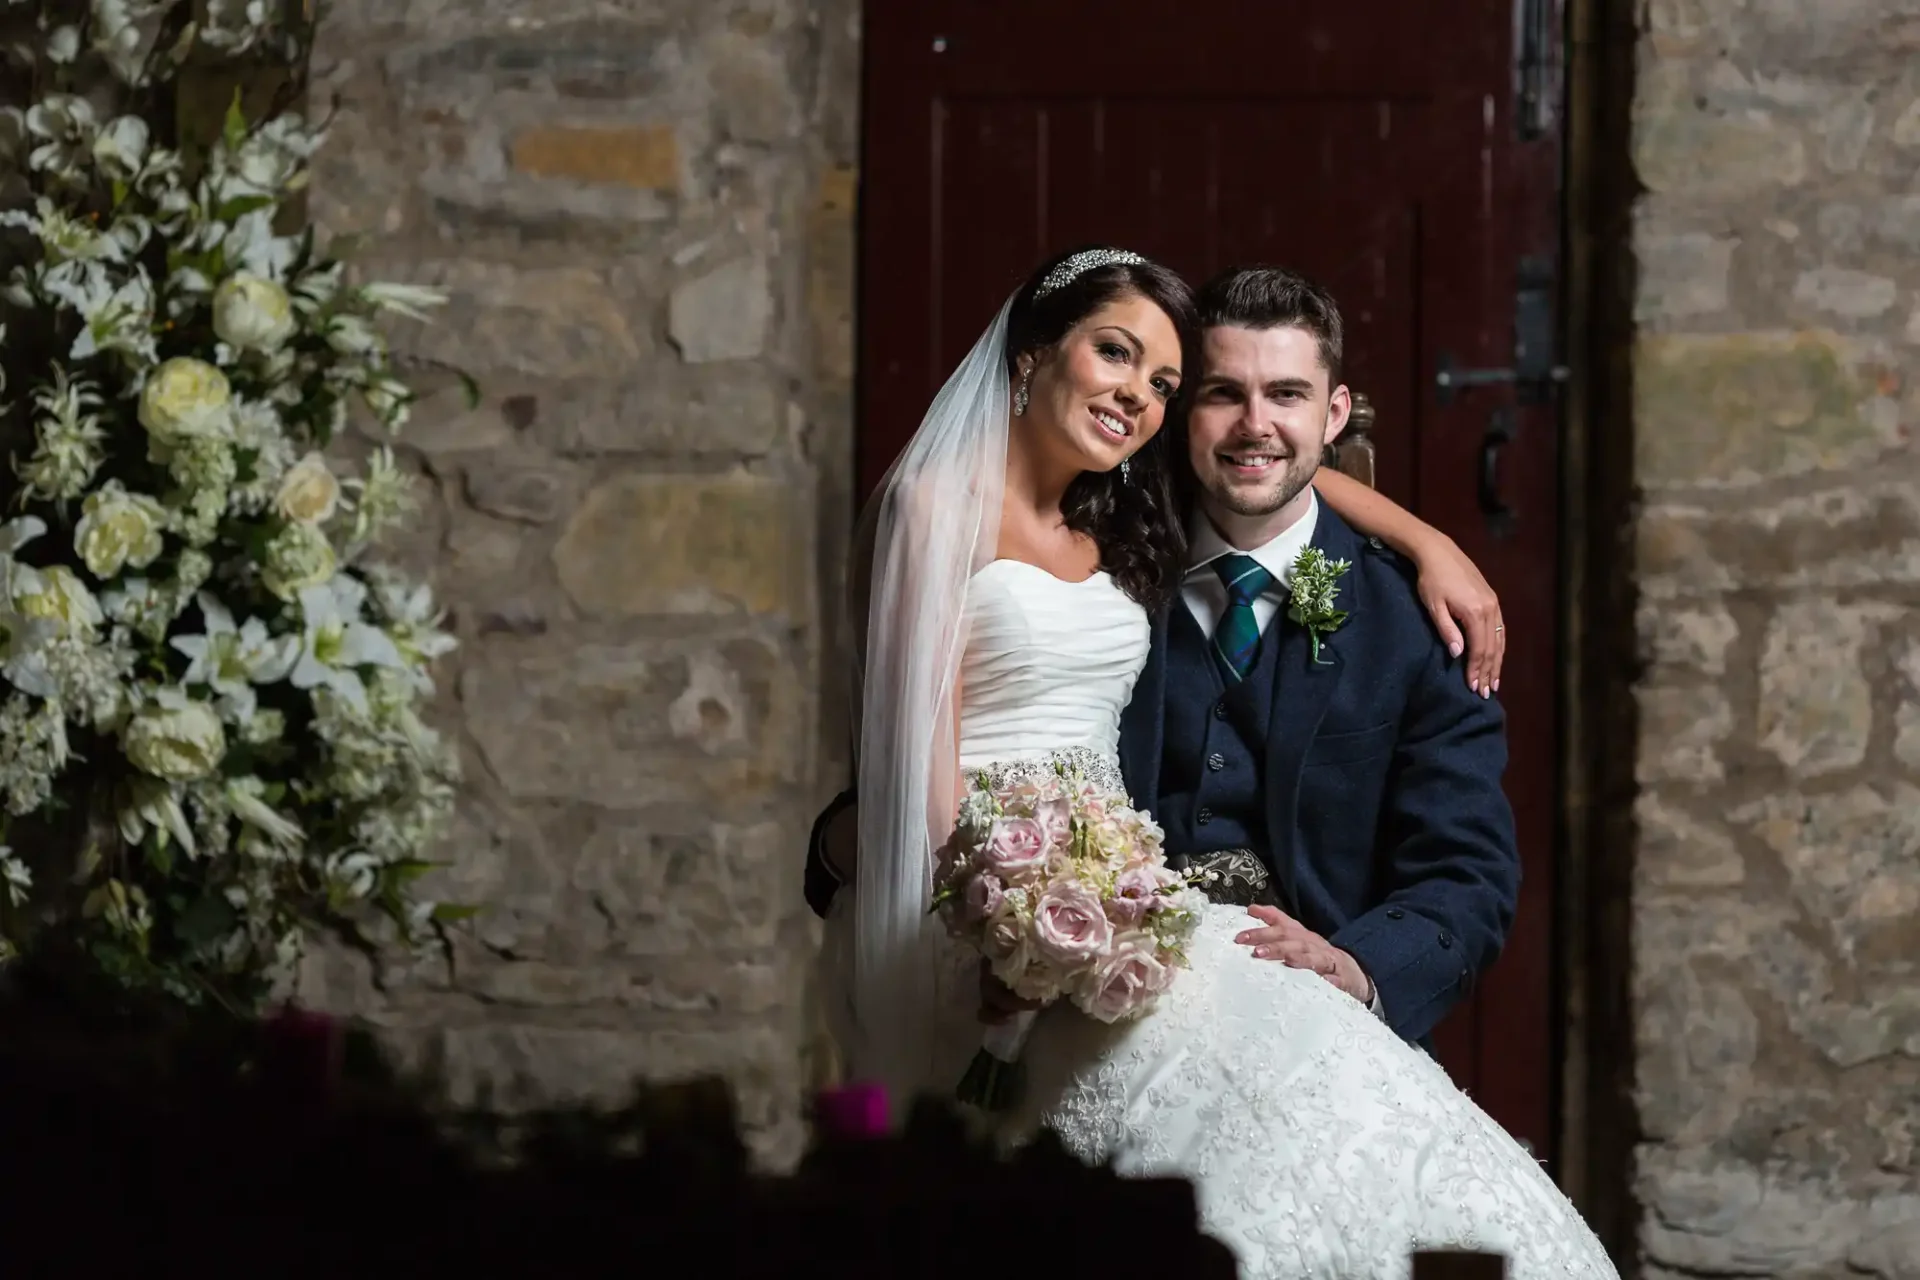 A bride and groom smiling and posing together at night, with the bride holding a bouquet, set against a stone building with a dark doorway.